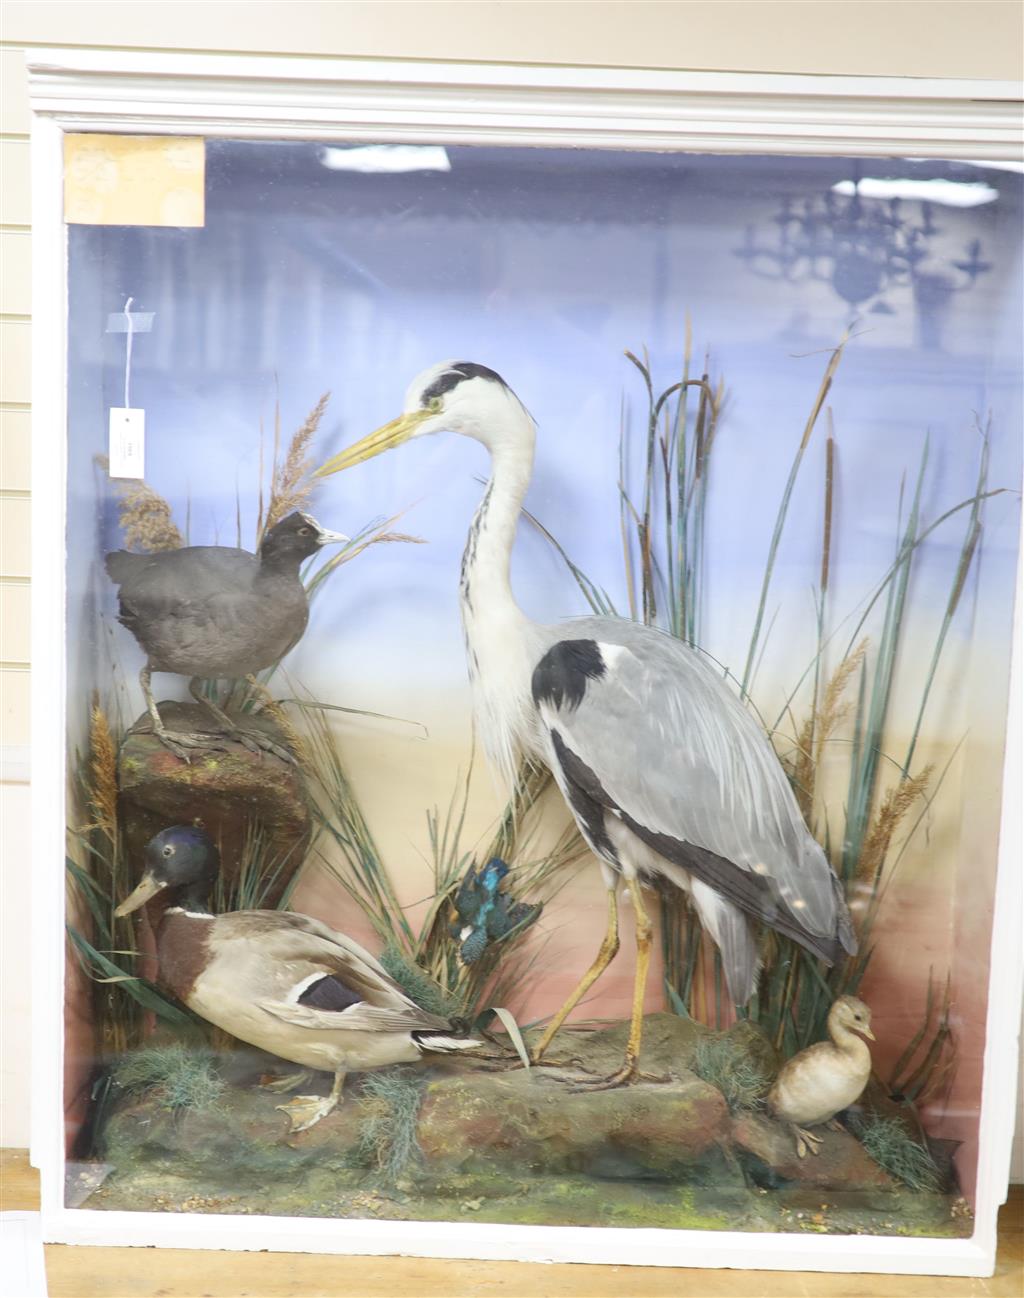 A taxidermic heron in display case